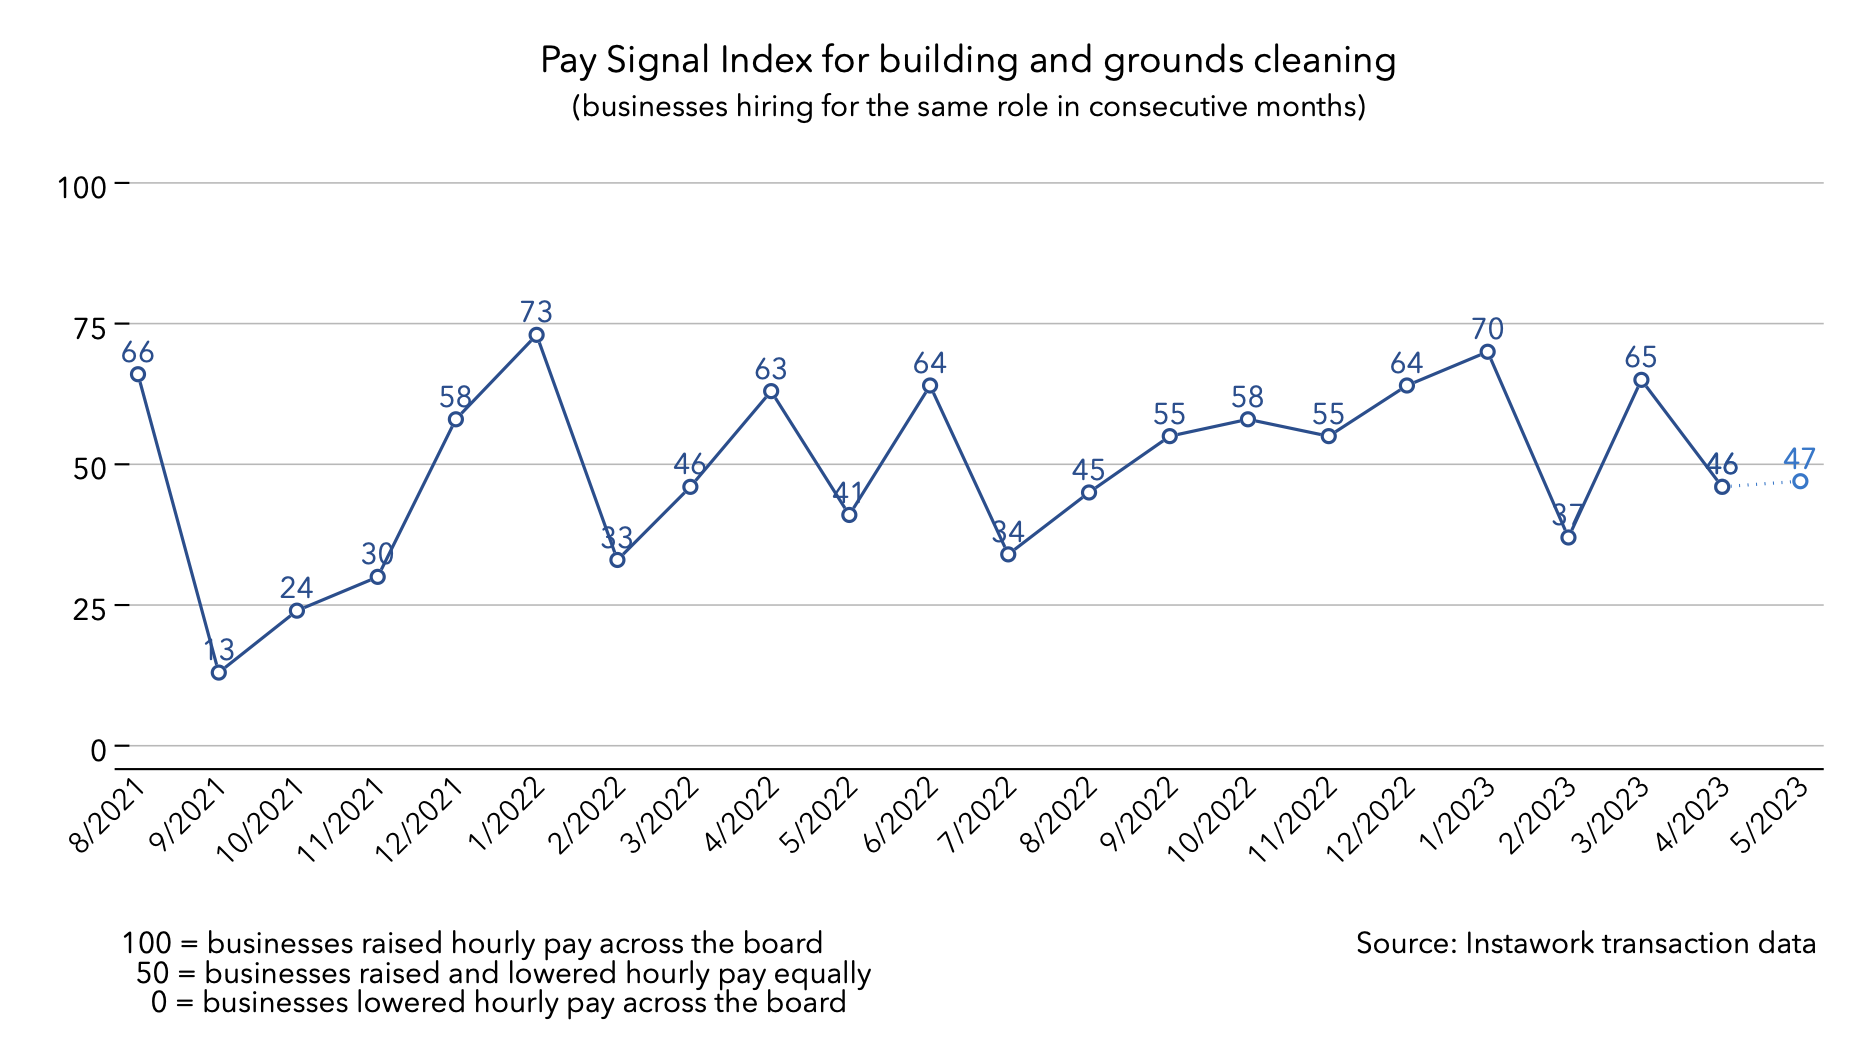 1 May 2023 Pay Signal Index for building and grounds cleaning